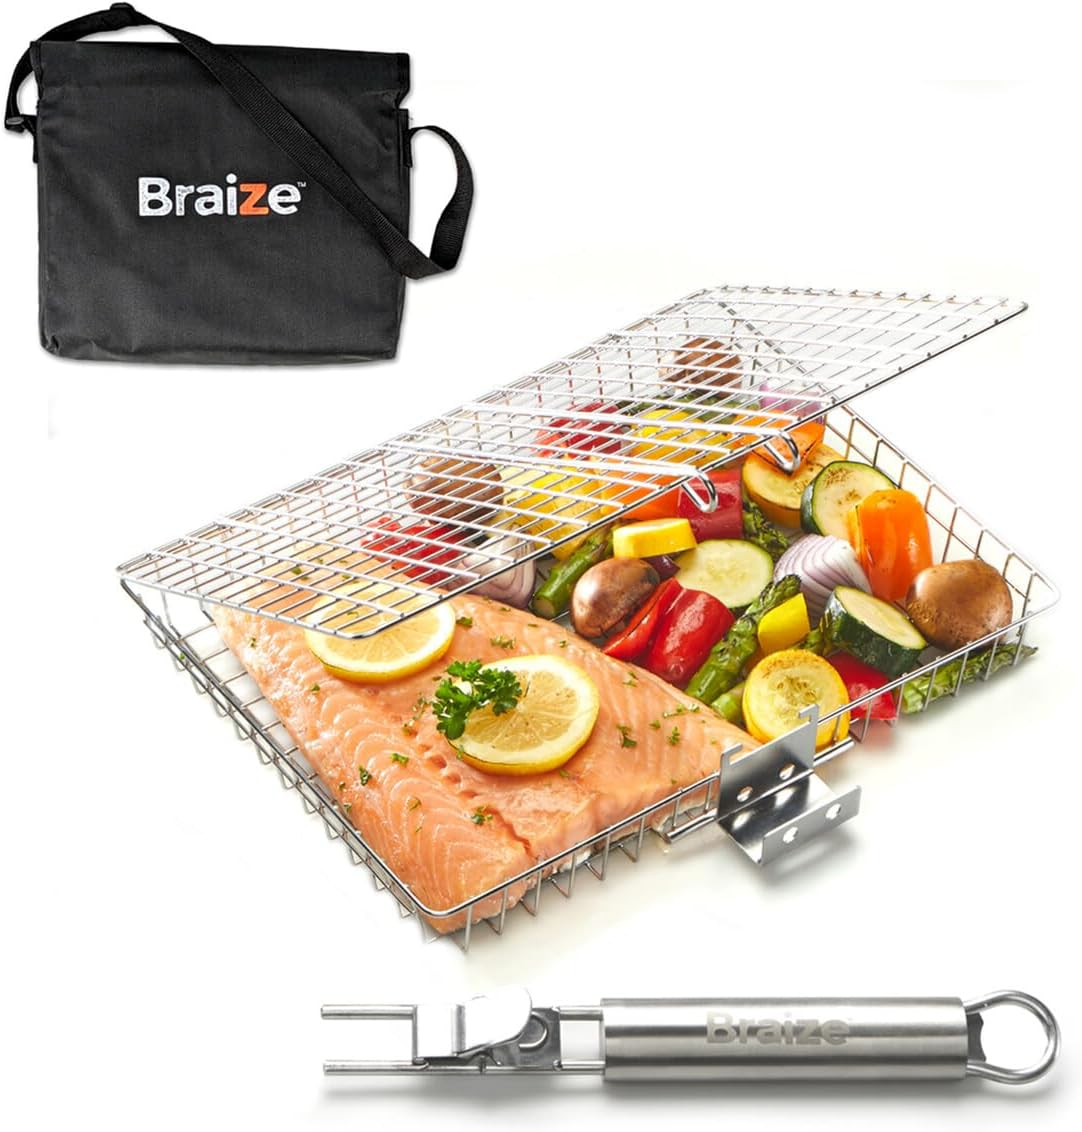 Stainless Steel Large Grill Basket with Easy Open/Close Lid and Removable Handle - 12.25 x 9.5 x 1.5 Inches - Includes Carry/Storage Bag for - Barbecue Whizz...Watch My Smoke!